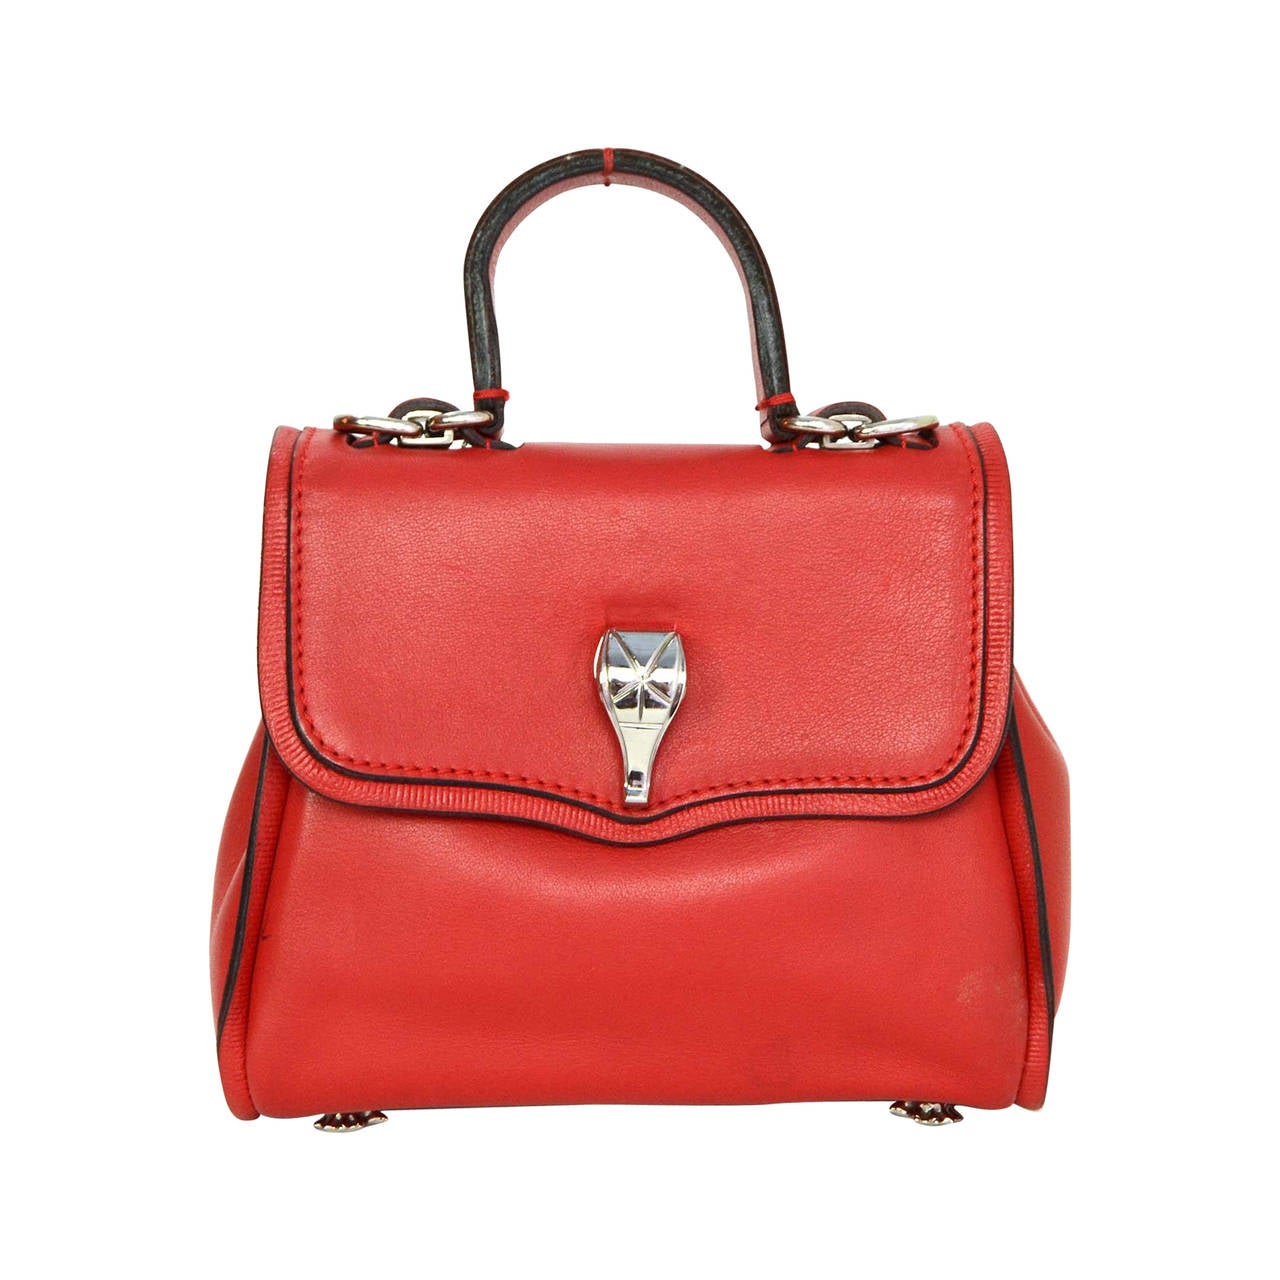 KIESELSTEIN-CORD Red Leather Small Satchel Bag SHW